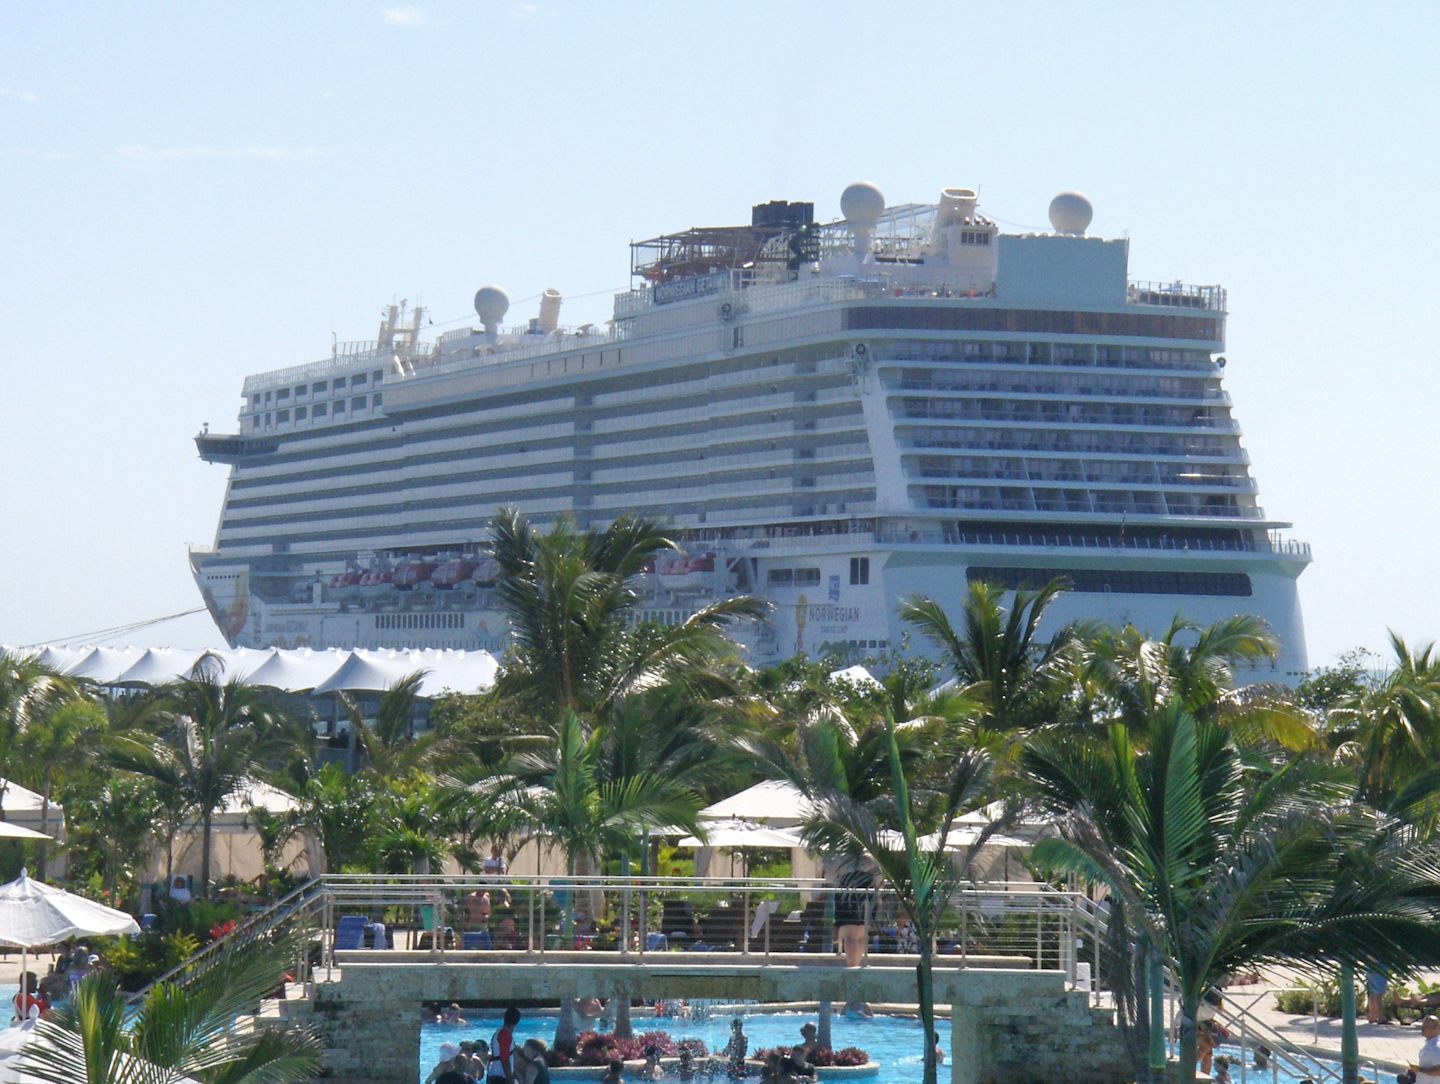 A view of the cruise ship from the second floor of Land Sharks Grill, it seems like its flying over the pool.